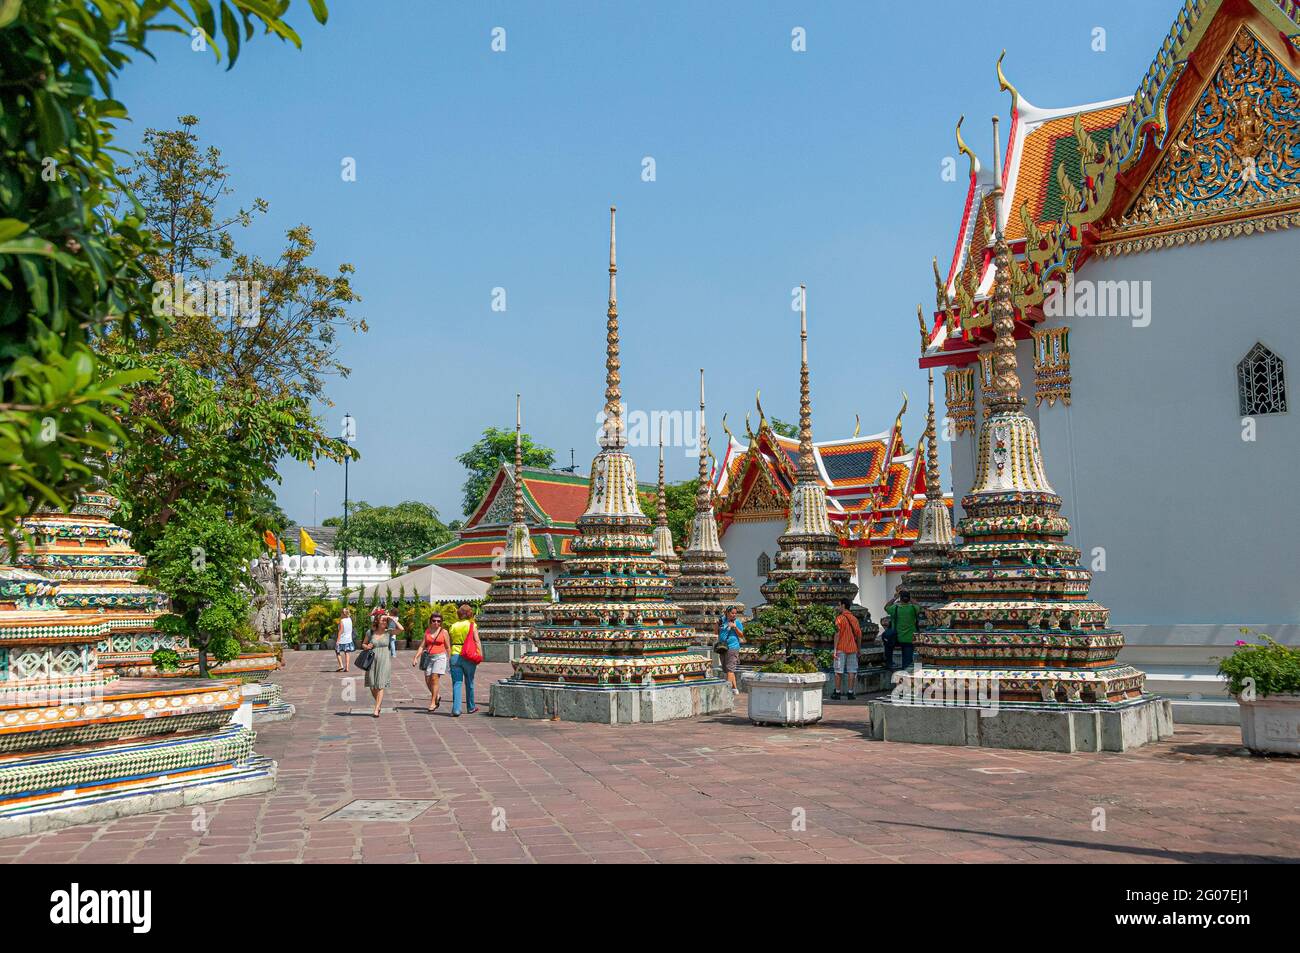 Tourists walking around ornate colourful prangs in the Wat Pho Wat Po Buddhist temple in Bangkok in Thailand in South East Asia. Stock Photo